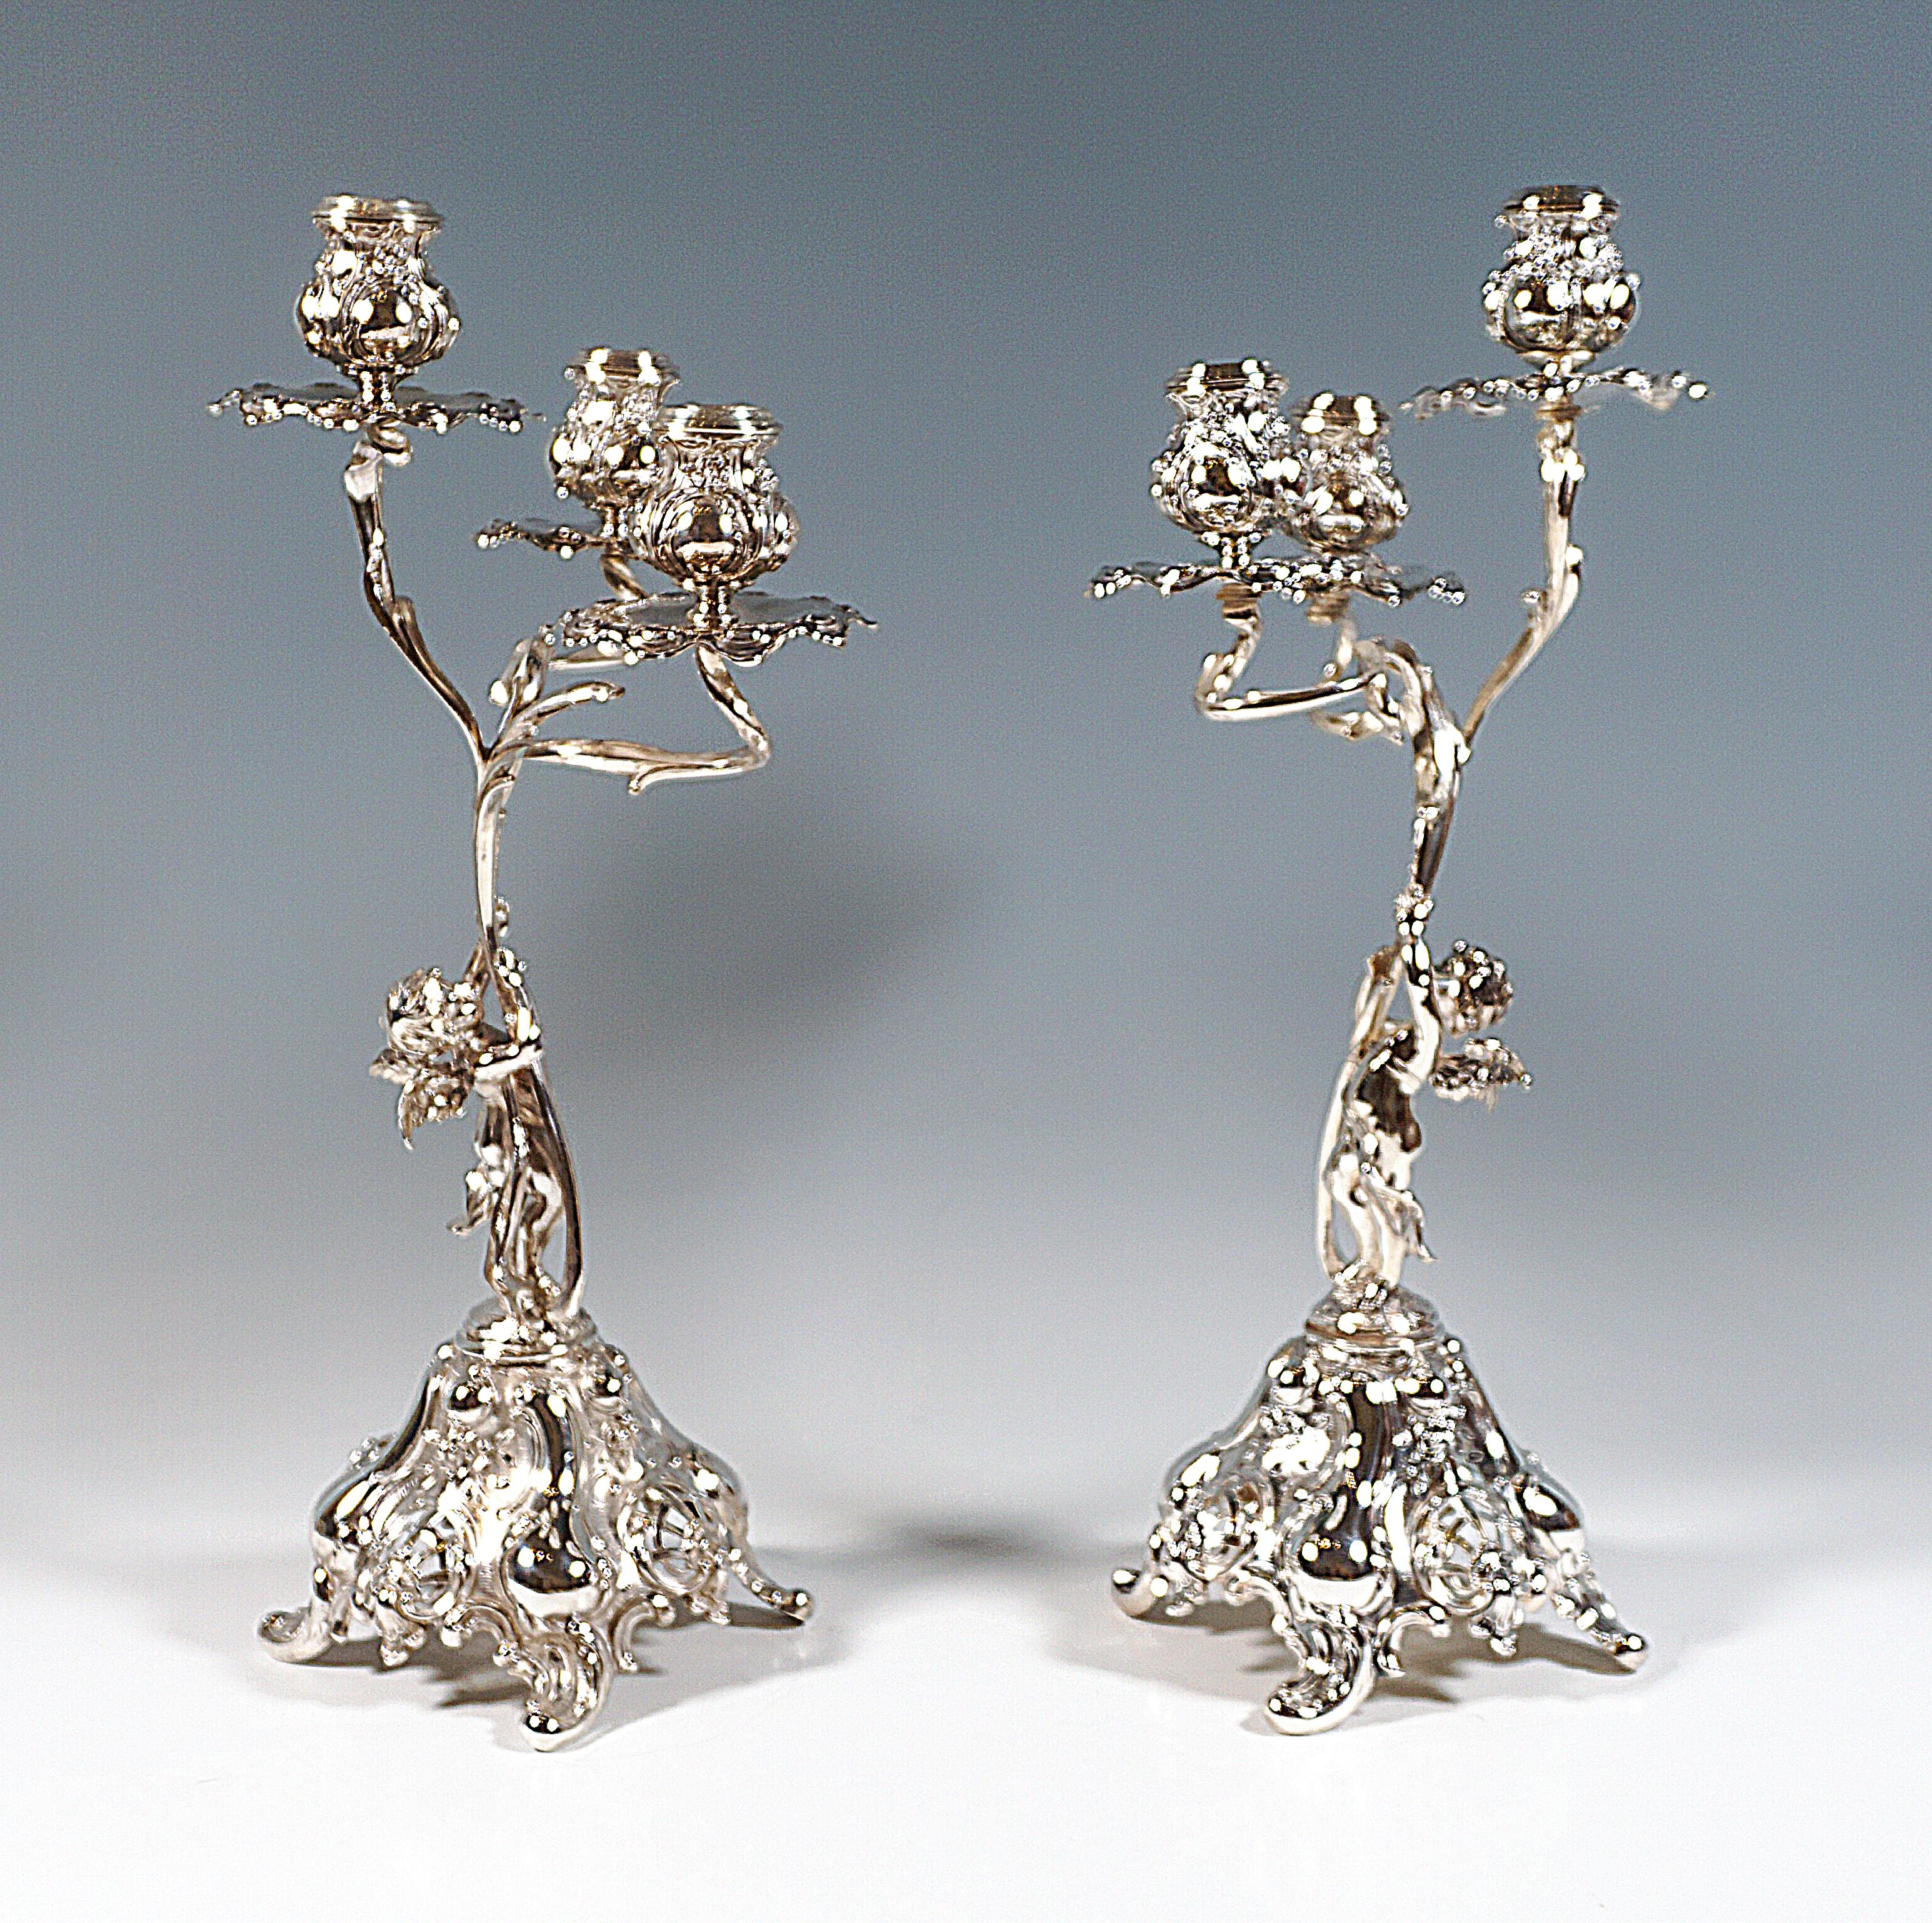 Hand-Crafted Pair Of 3-Flame Art Nouveau Silver Candleholders With Putti, Germany, Ca 1900 For Sale